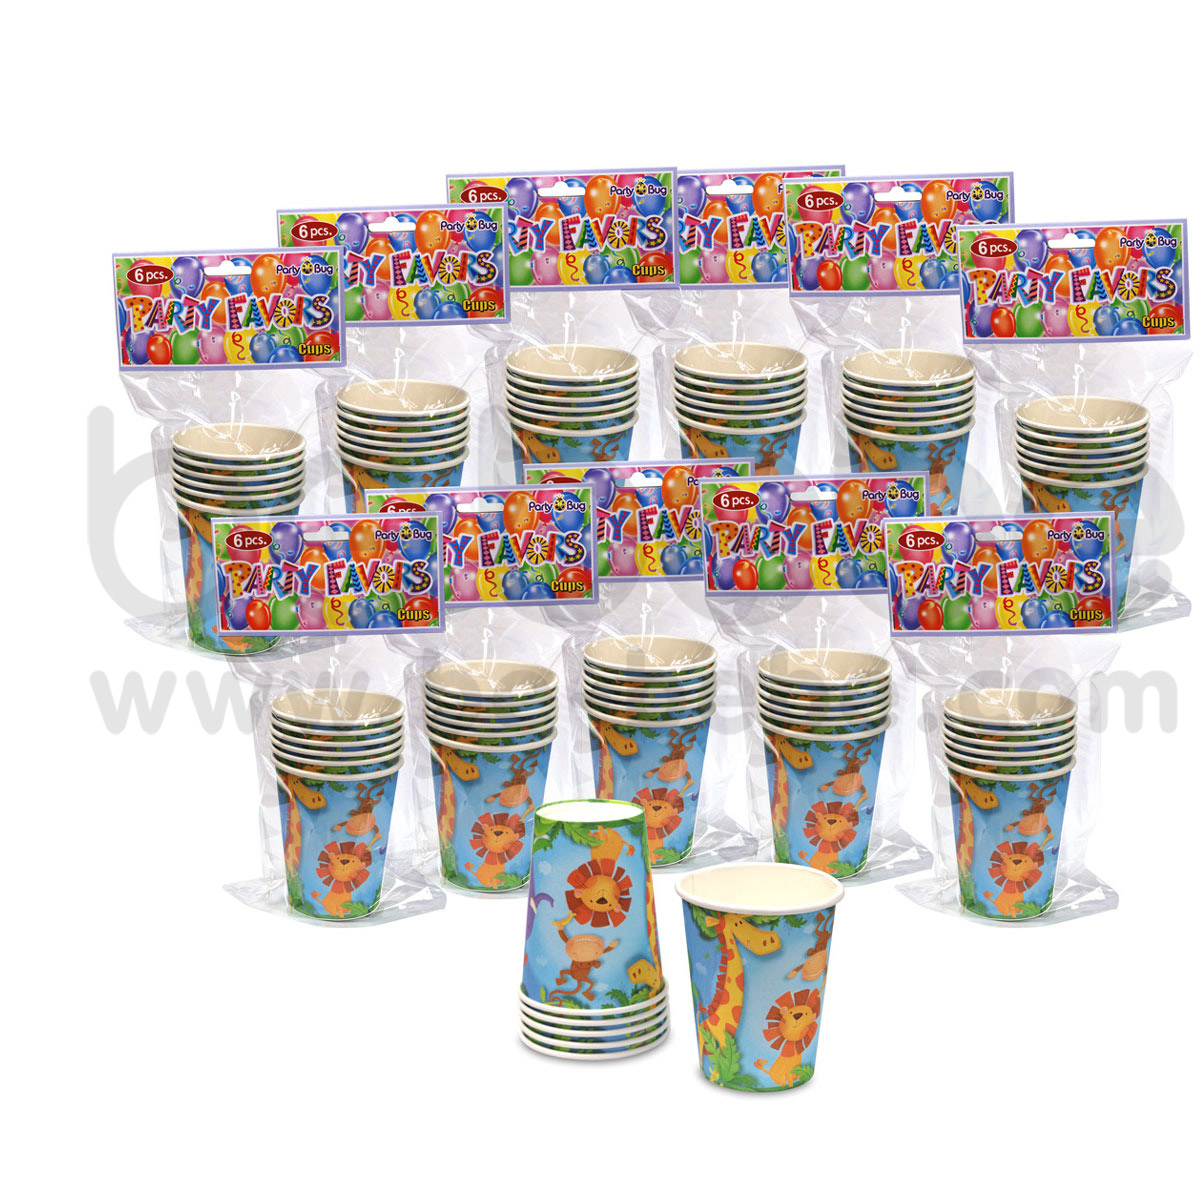 PARTY BUG : Paper cup 9 Oz.,12 Packs